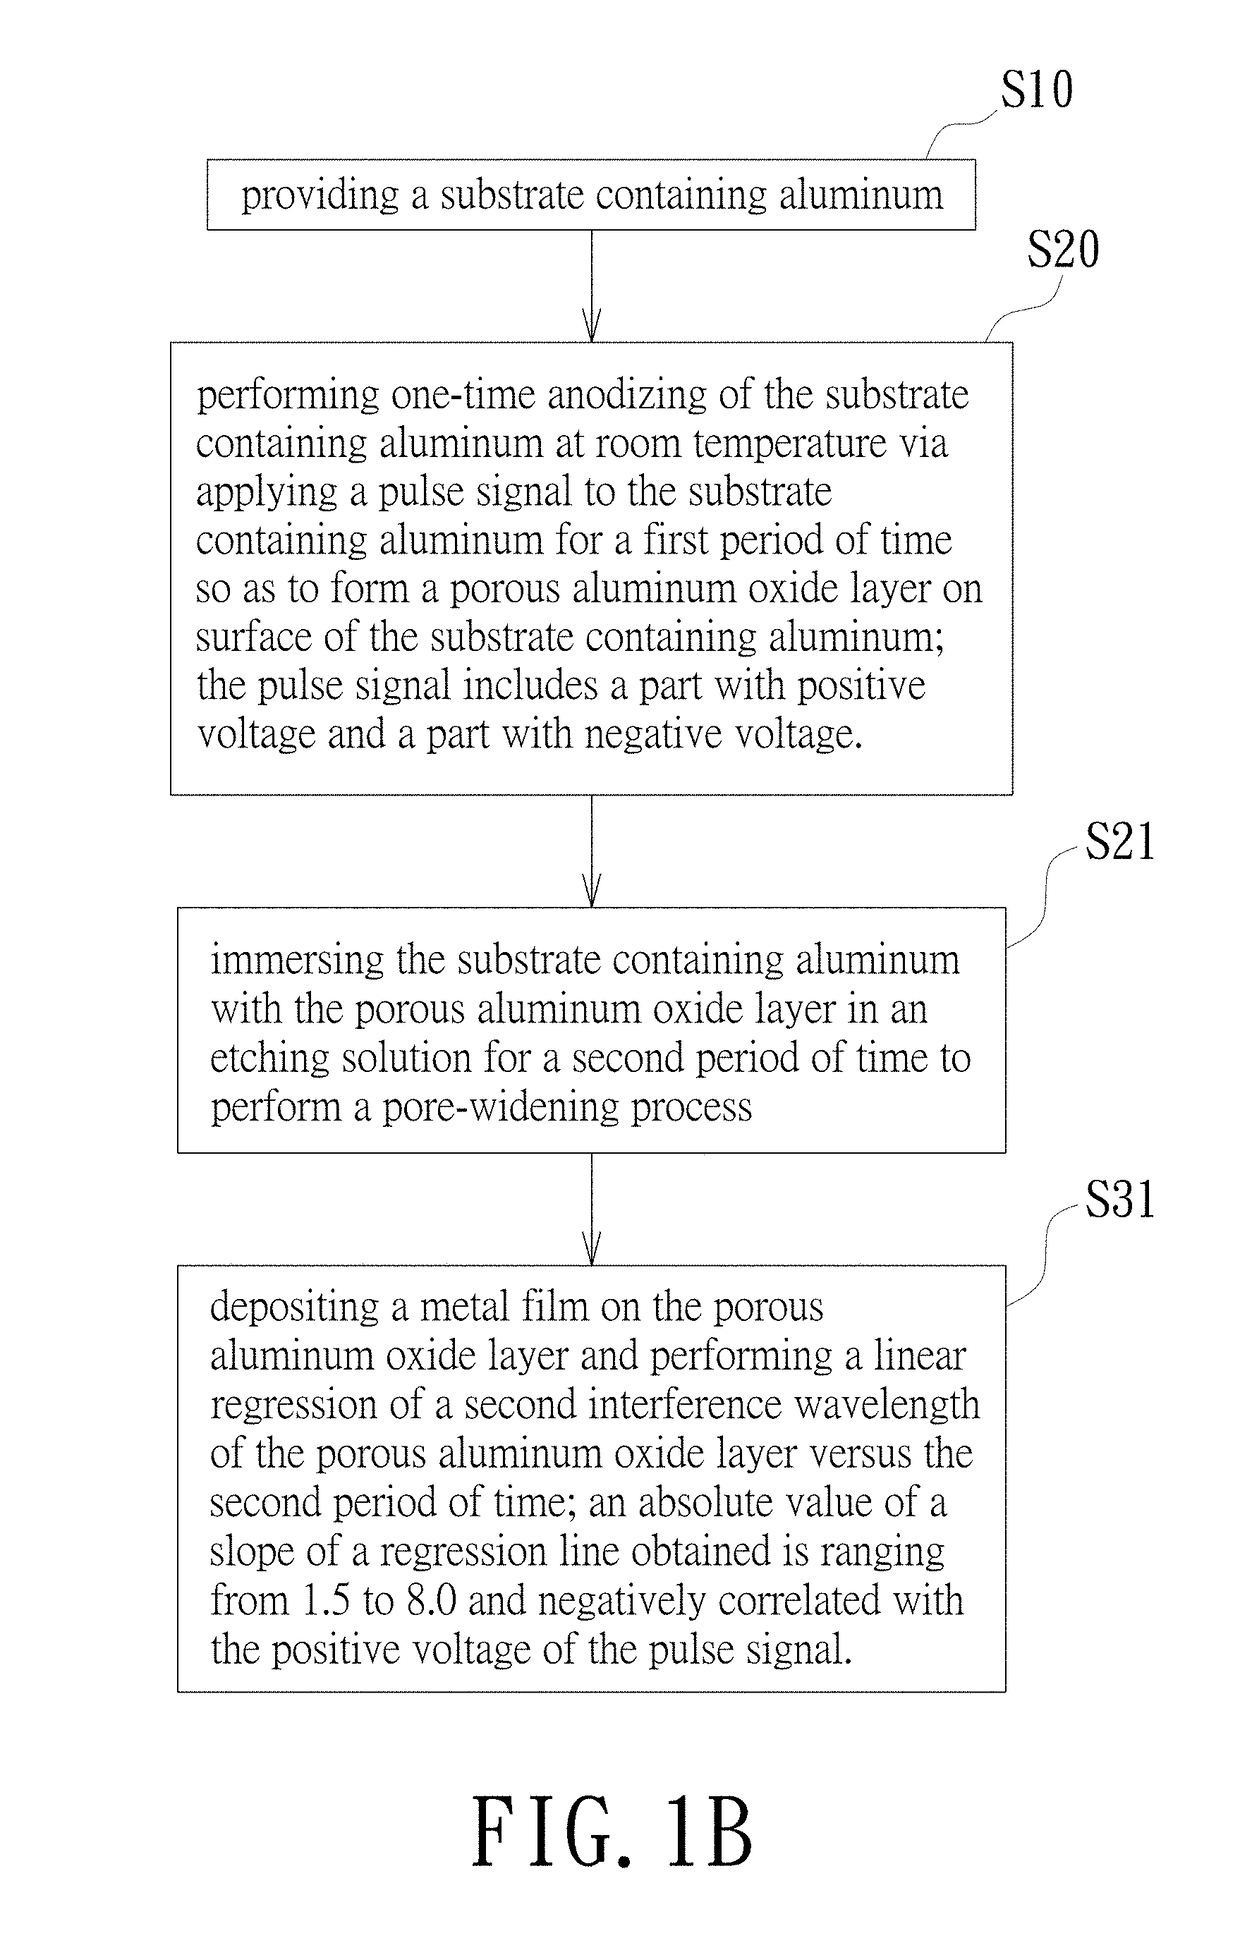 Method for dye-free coloring of one-time anodic aluminum oxide surface